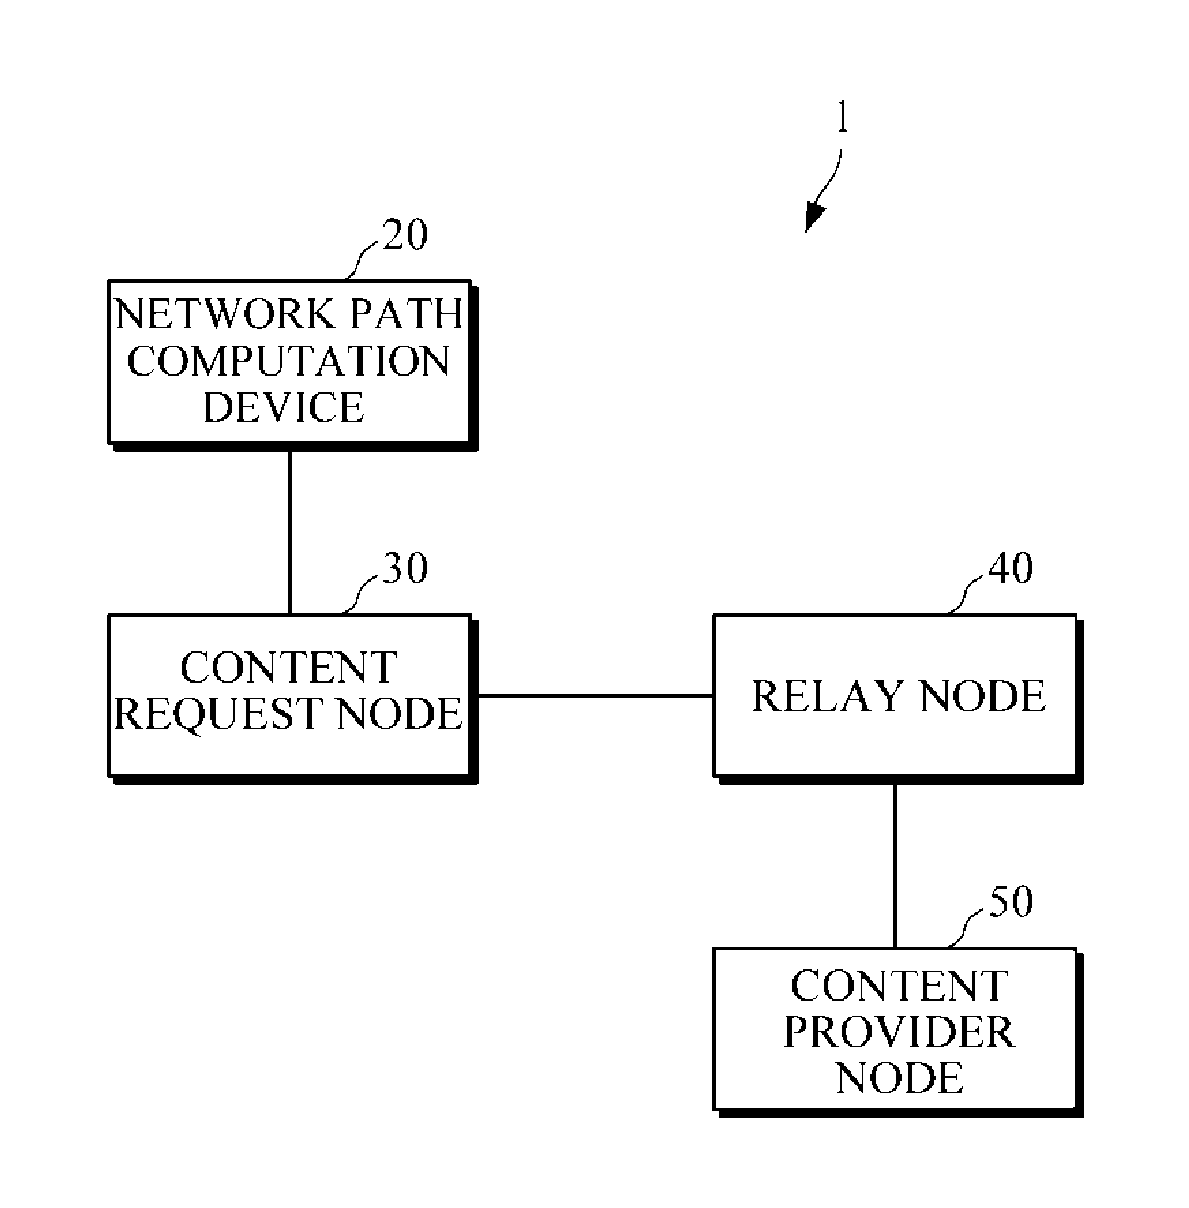 Information centric network system including network path computation device, content request node, and relay node and method of computing network path using information centric network